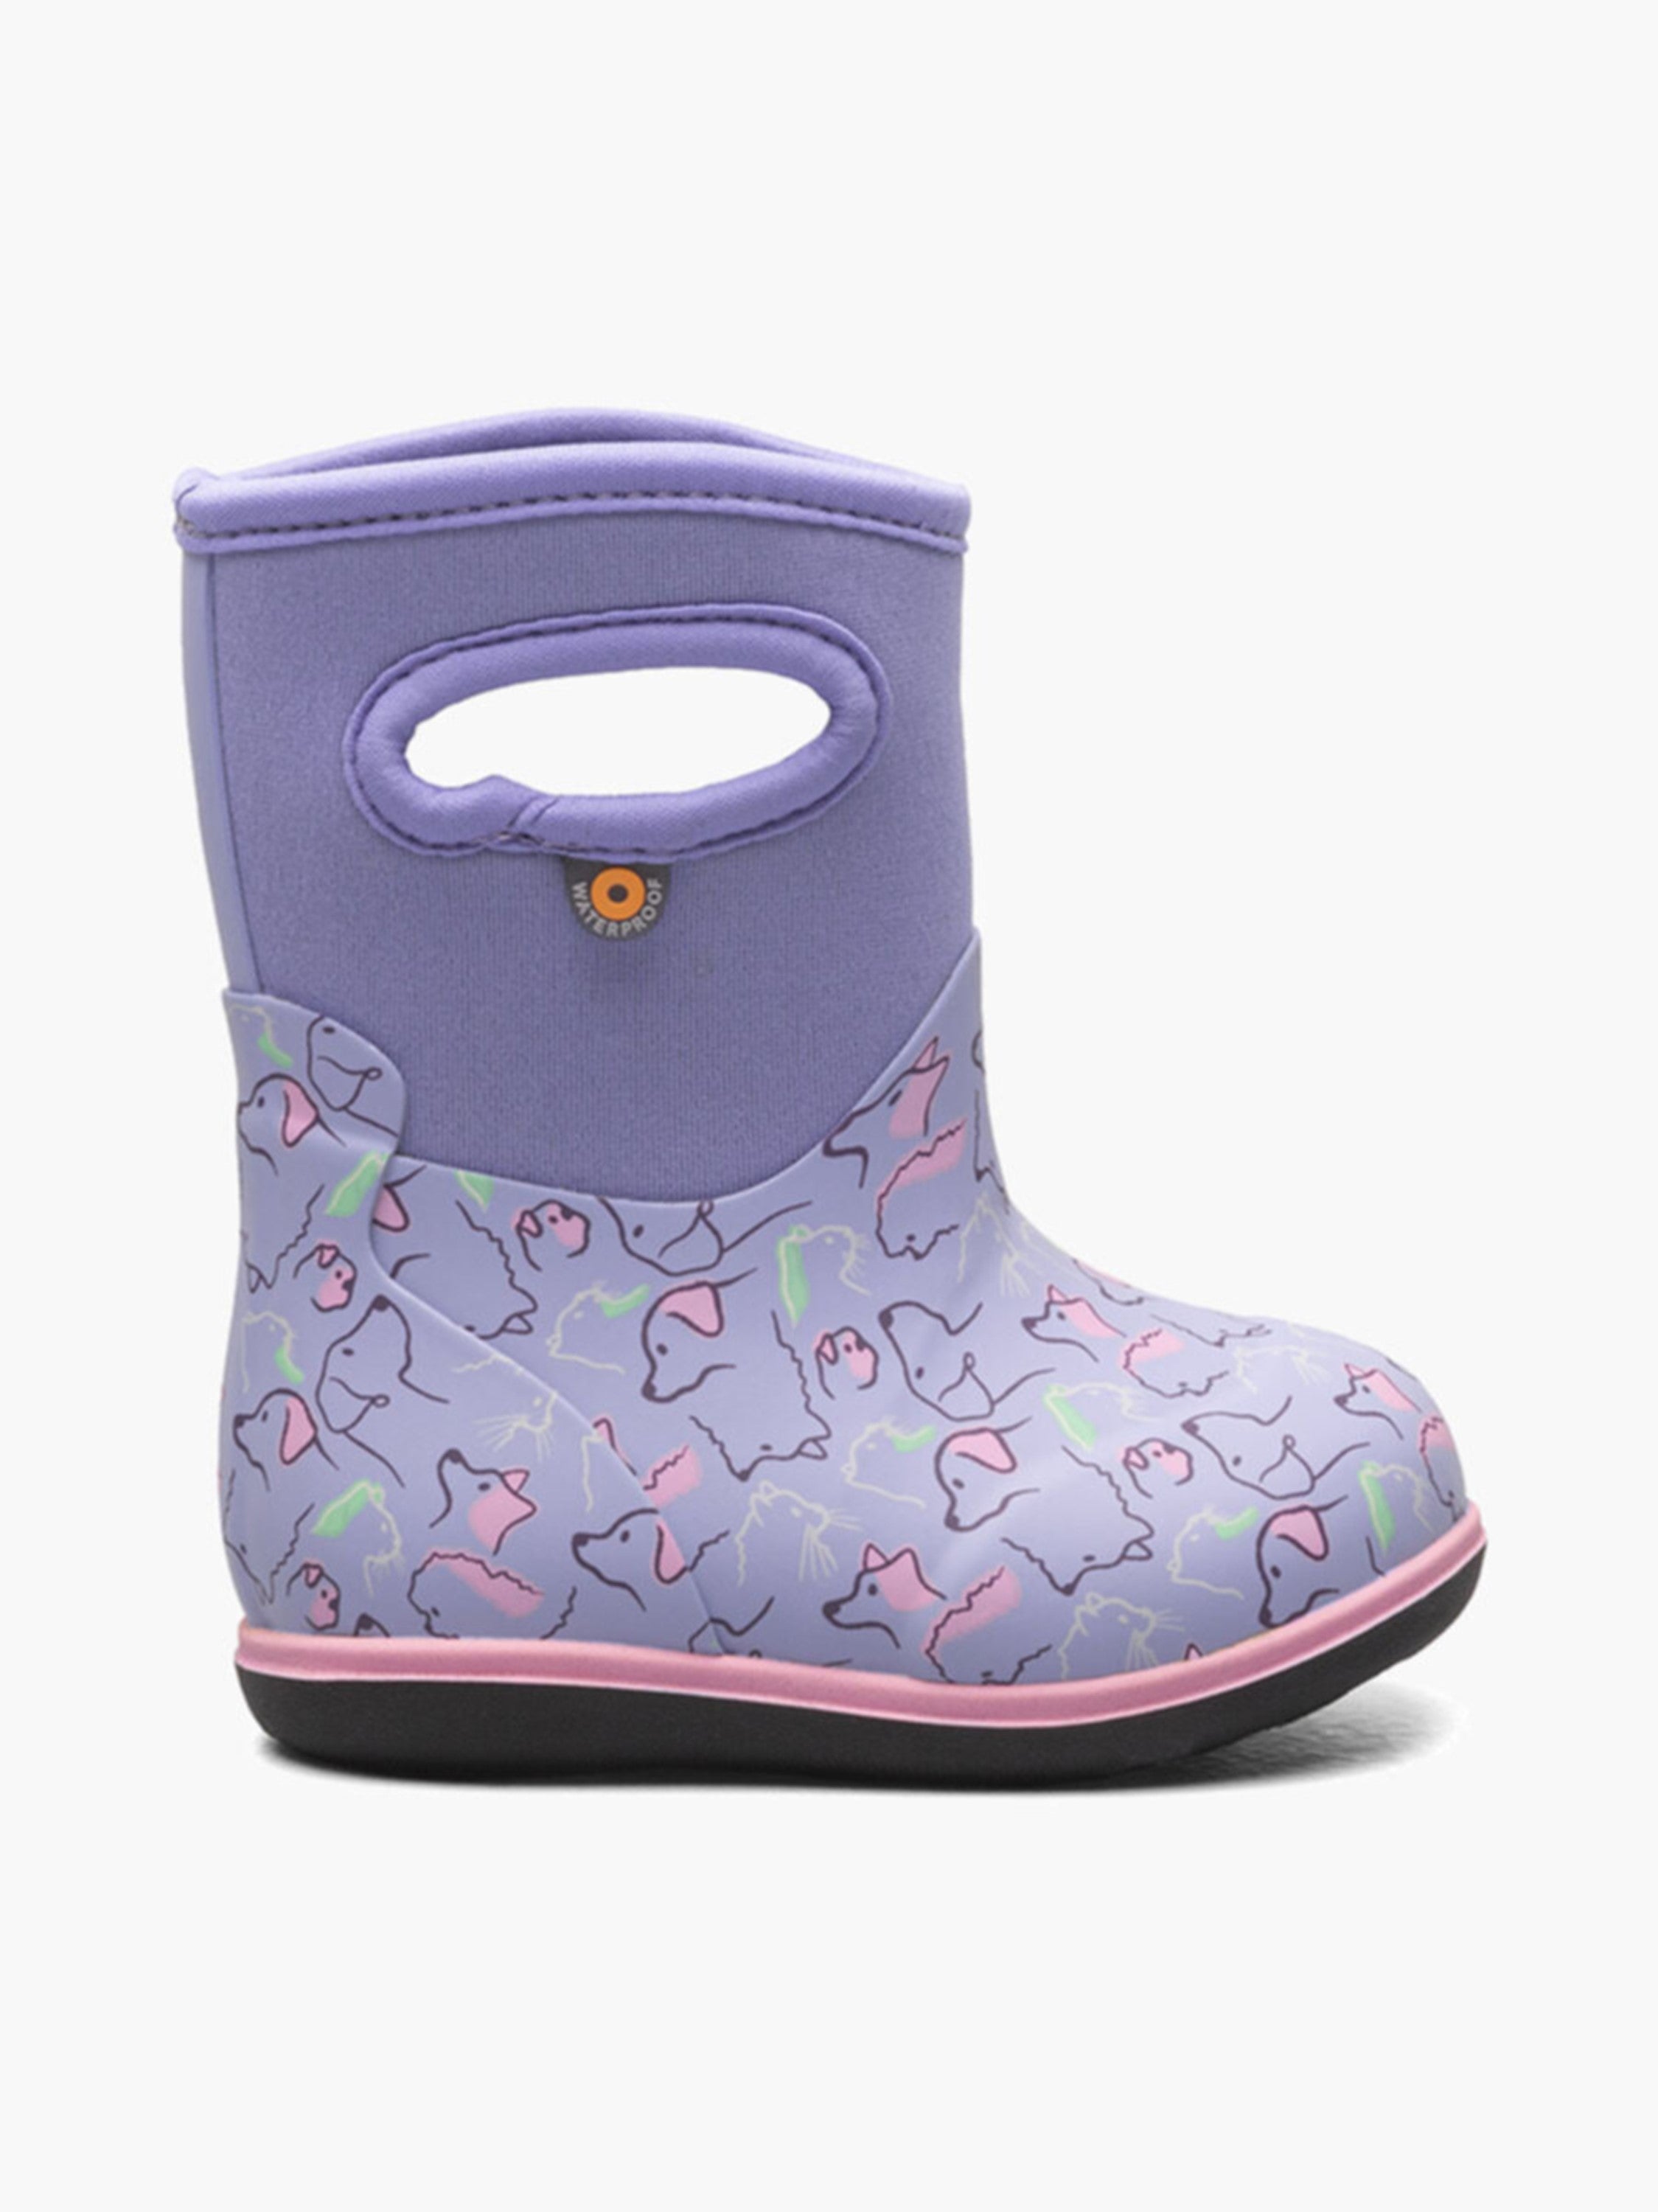 Baby Classic Toddler Waterproof Boot - Periwinkle Pets